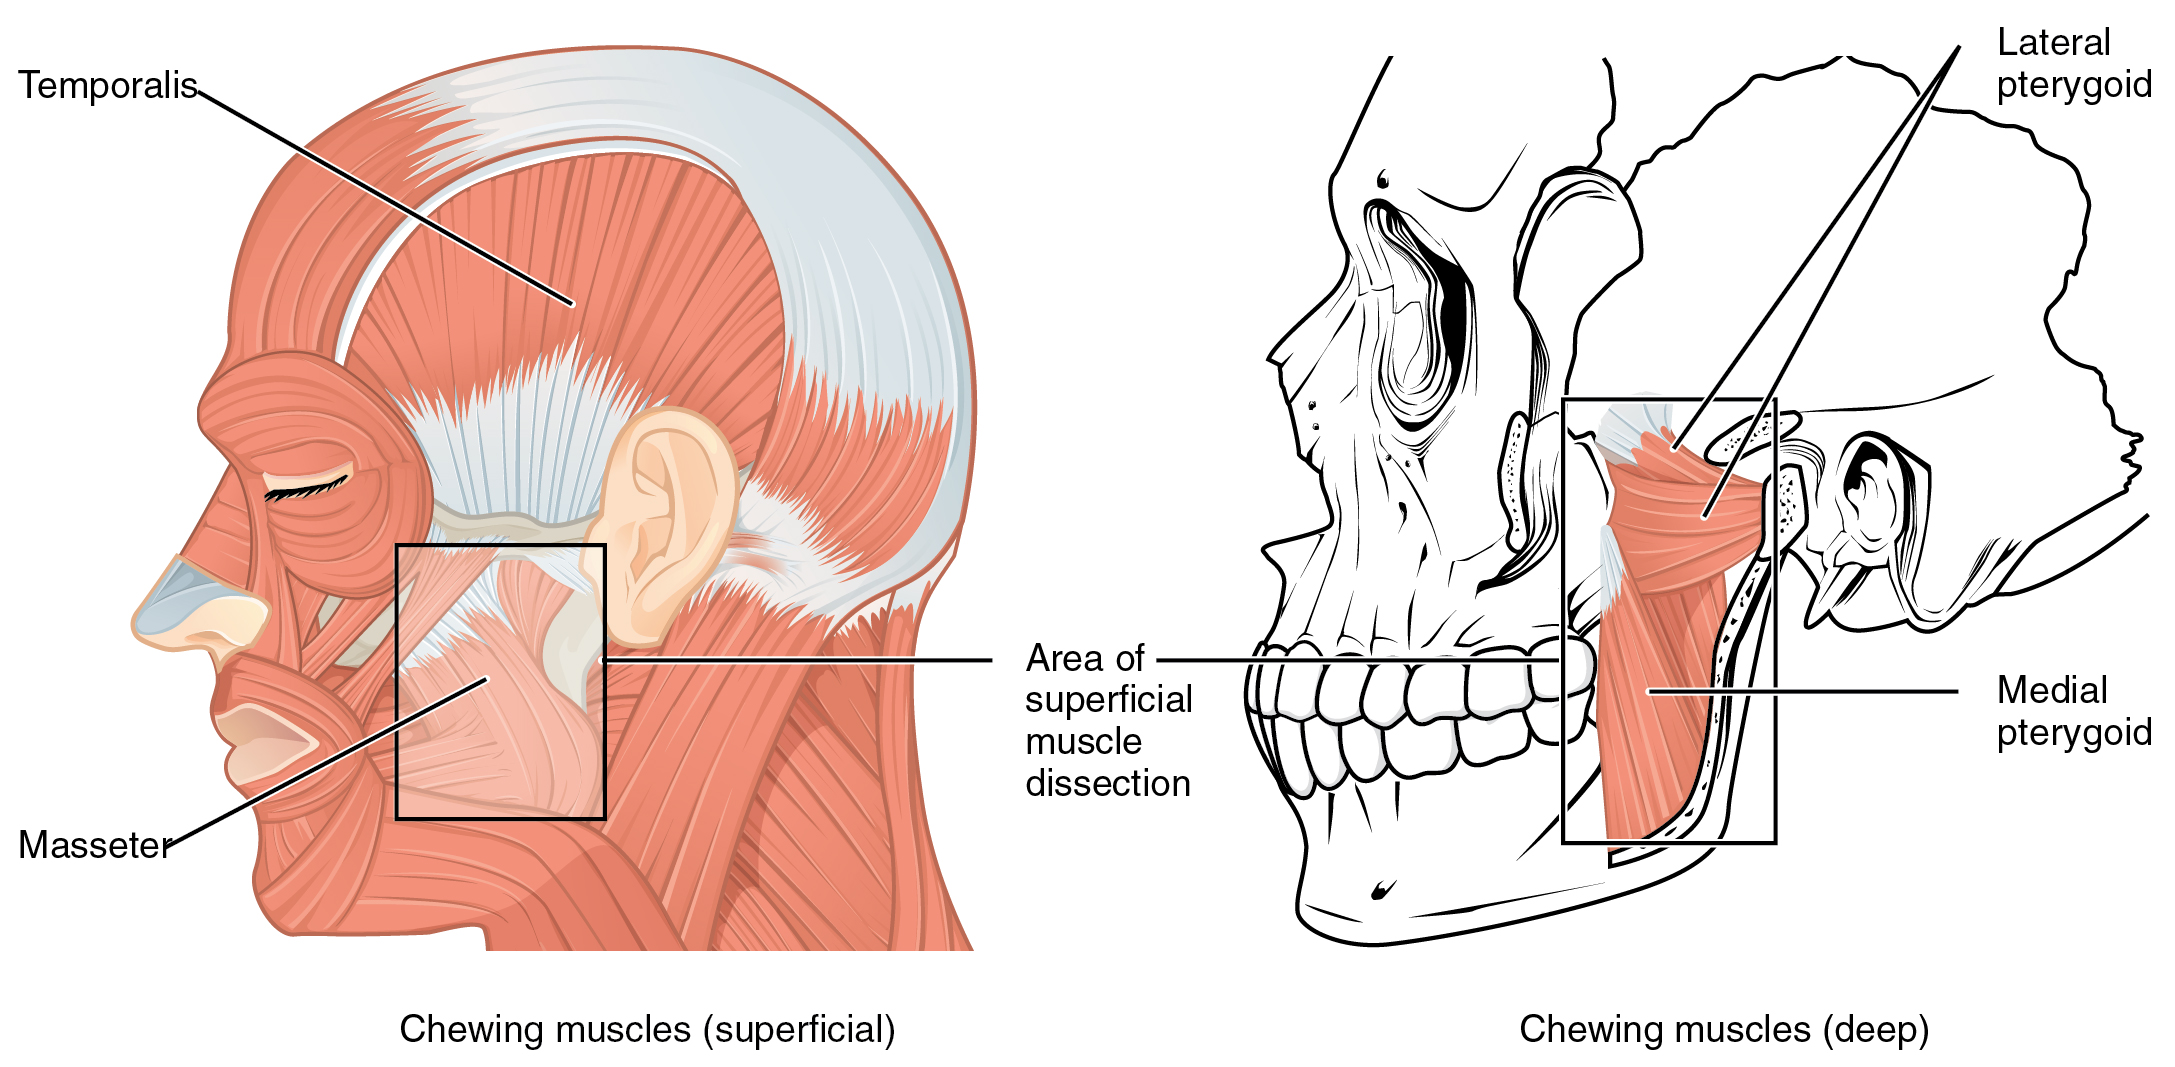 The left panel of this figure shows the superficial chewing muscles in face, and the right panel shows the deep chewing muscles.